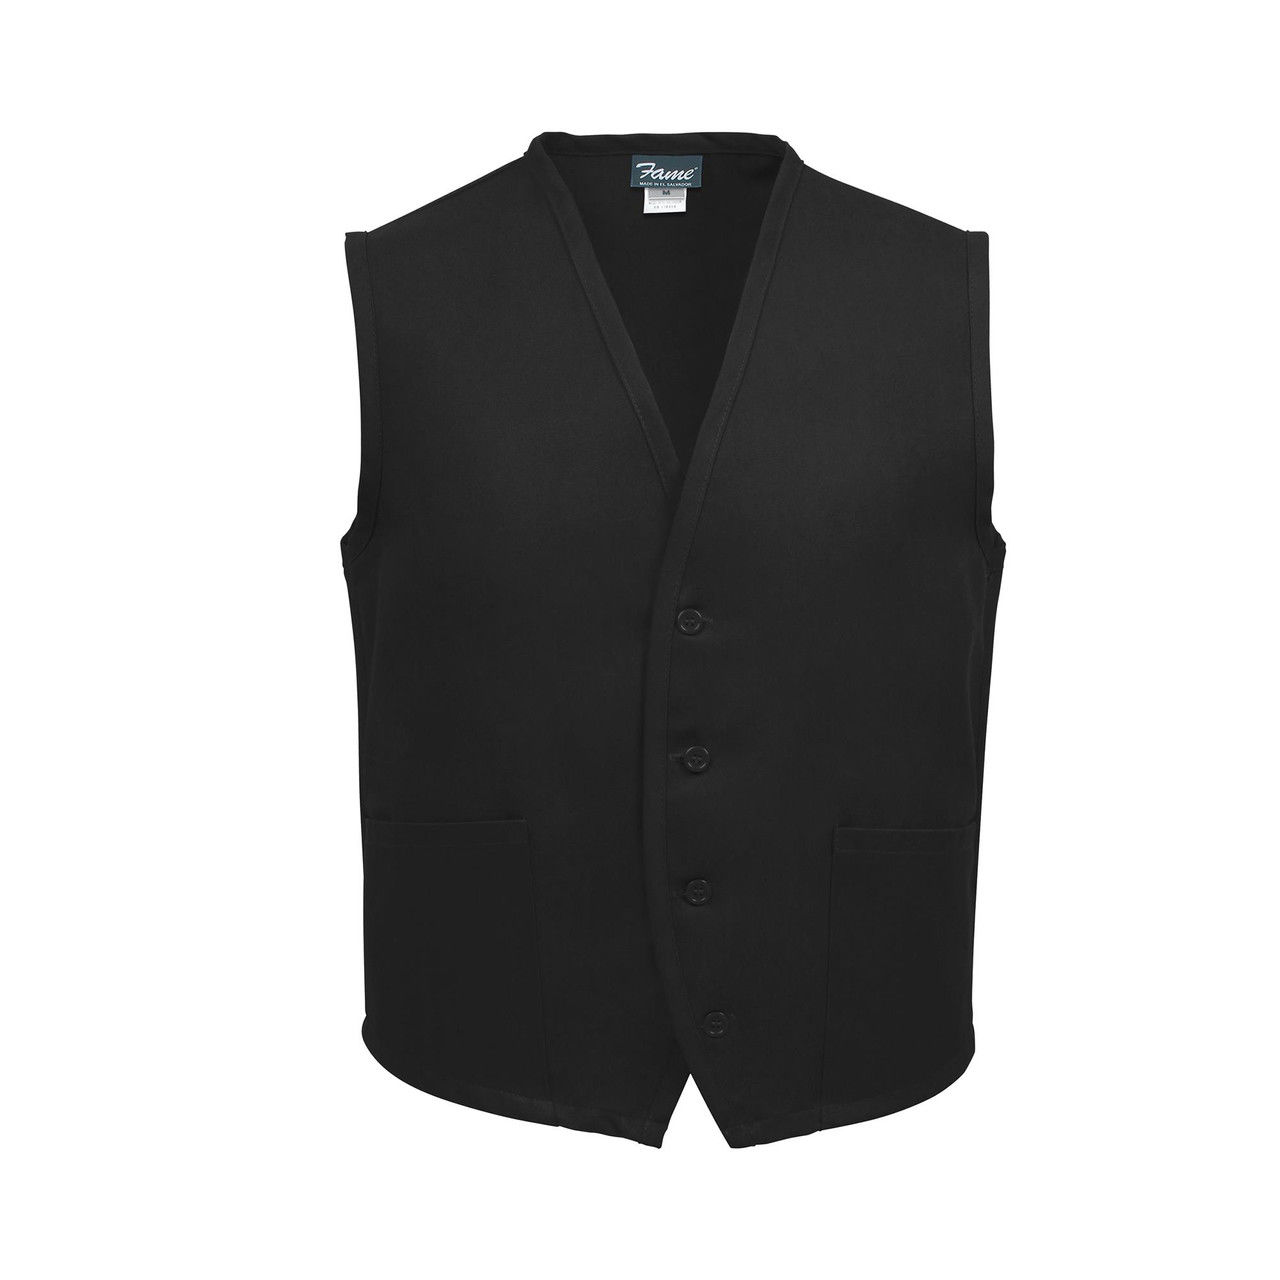 Does the uniform vests with pockets have a specific type of closure?